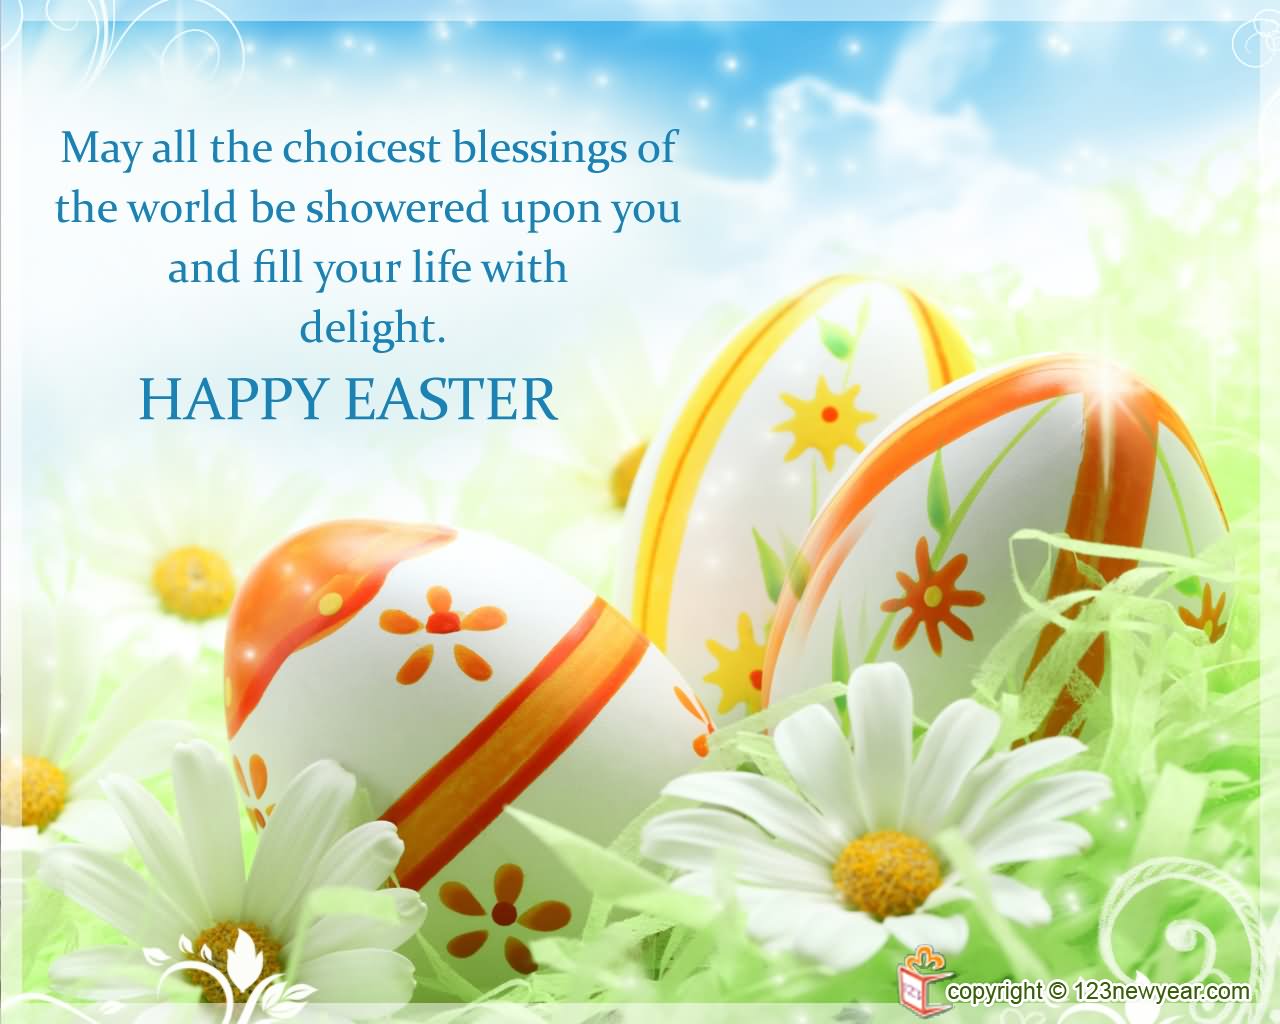 May All The Choicest Blessings Of The World Be Showered Upon You And Fill Your Life With Delight Happy Easter